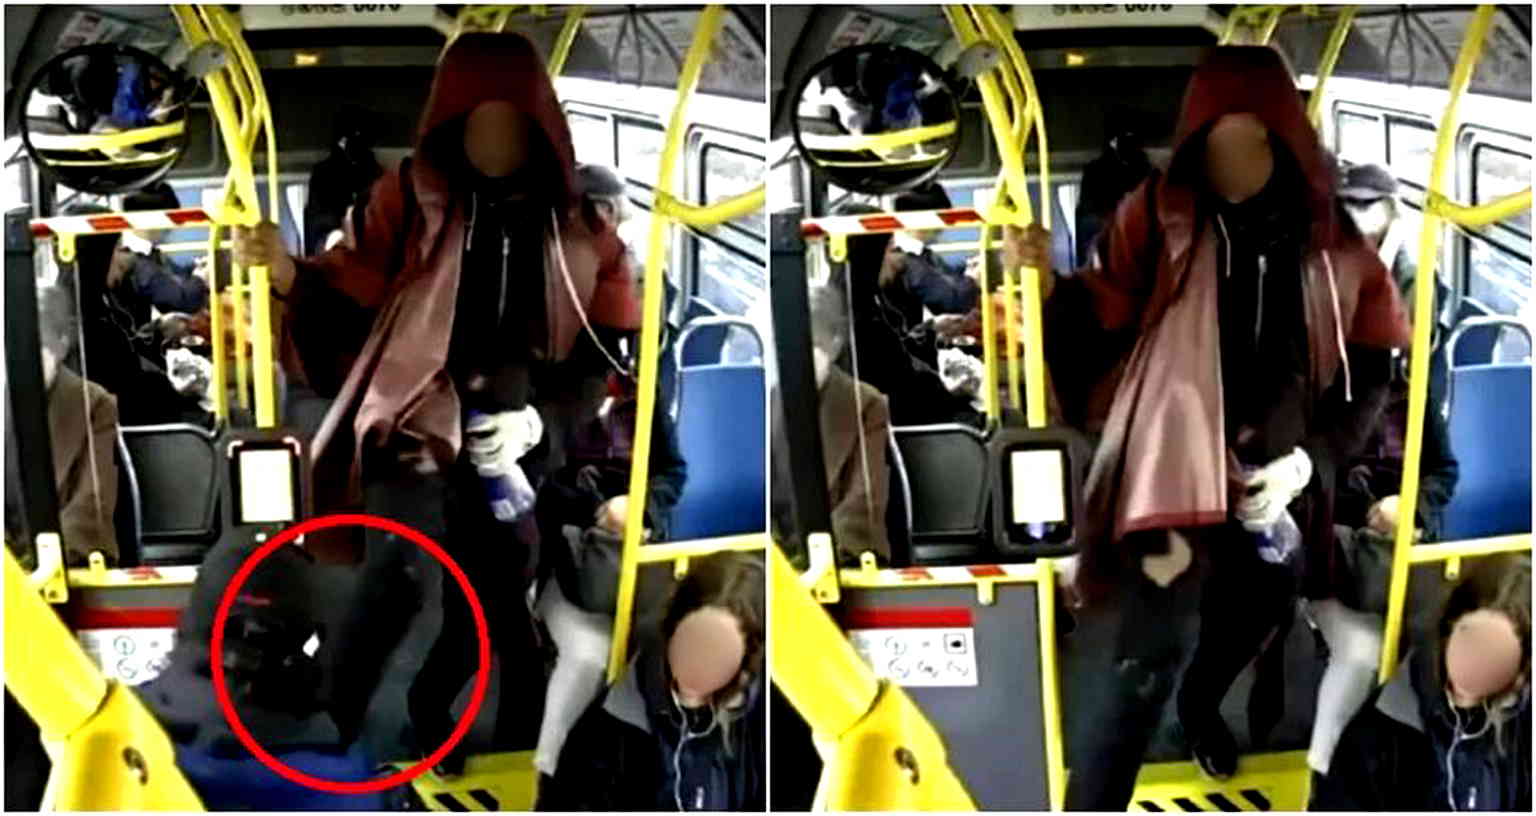 17-year-old arrested for kicking elderly Asian woman on SF Muni bus